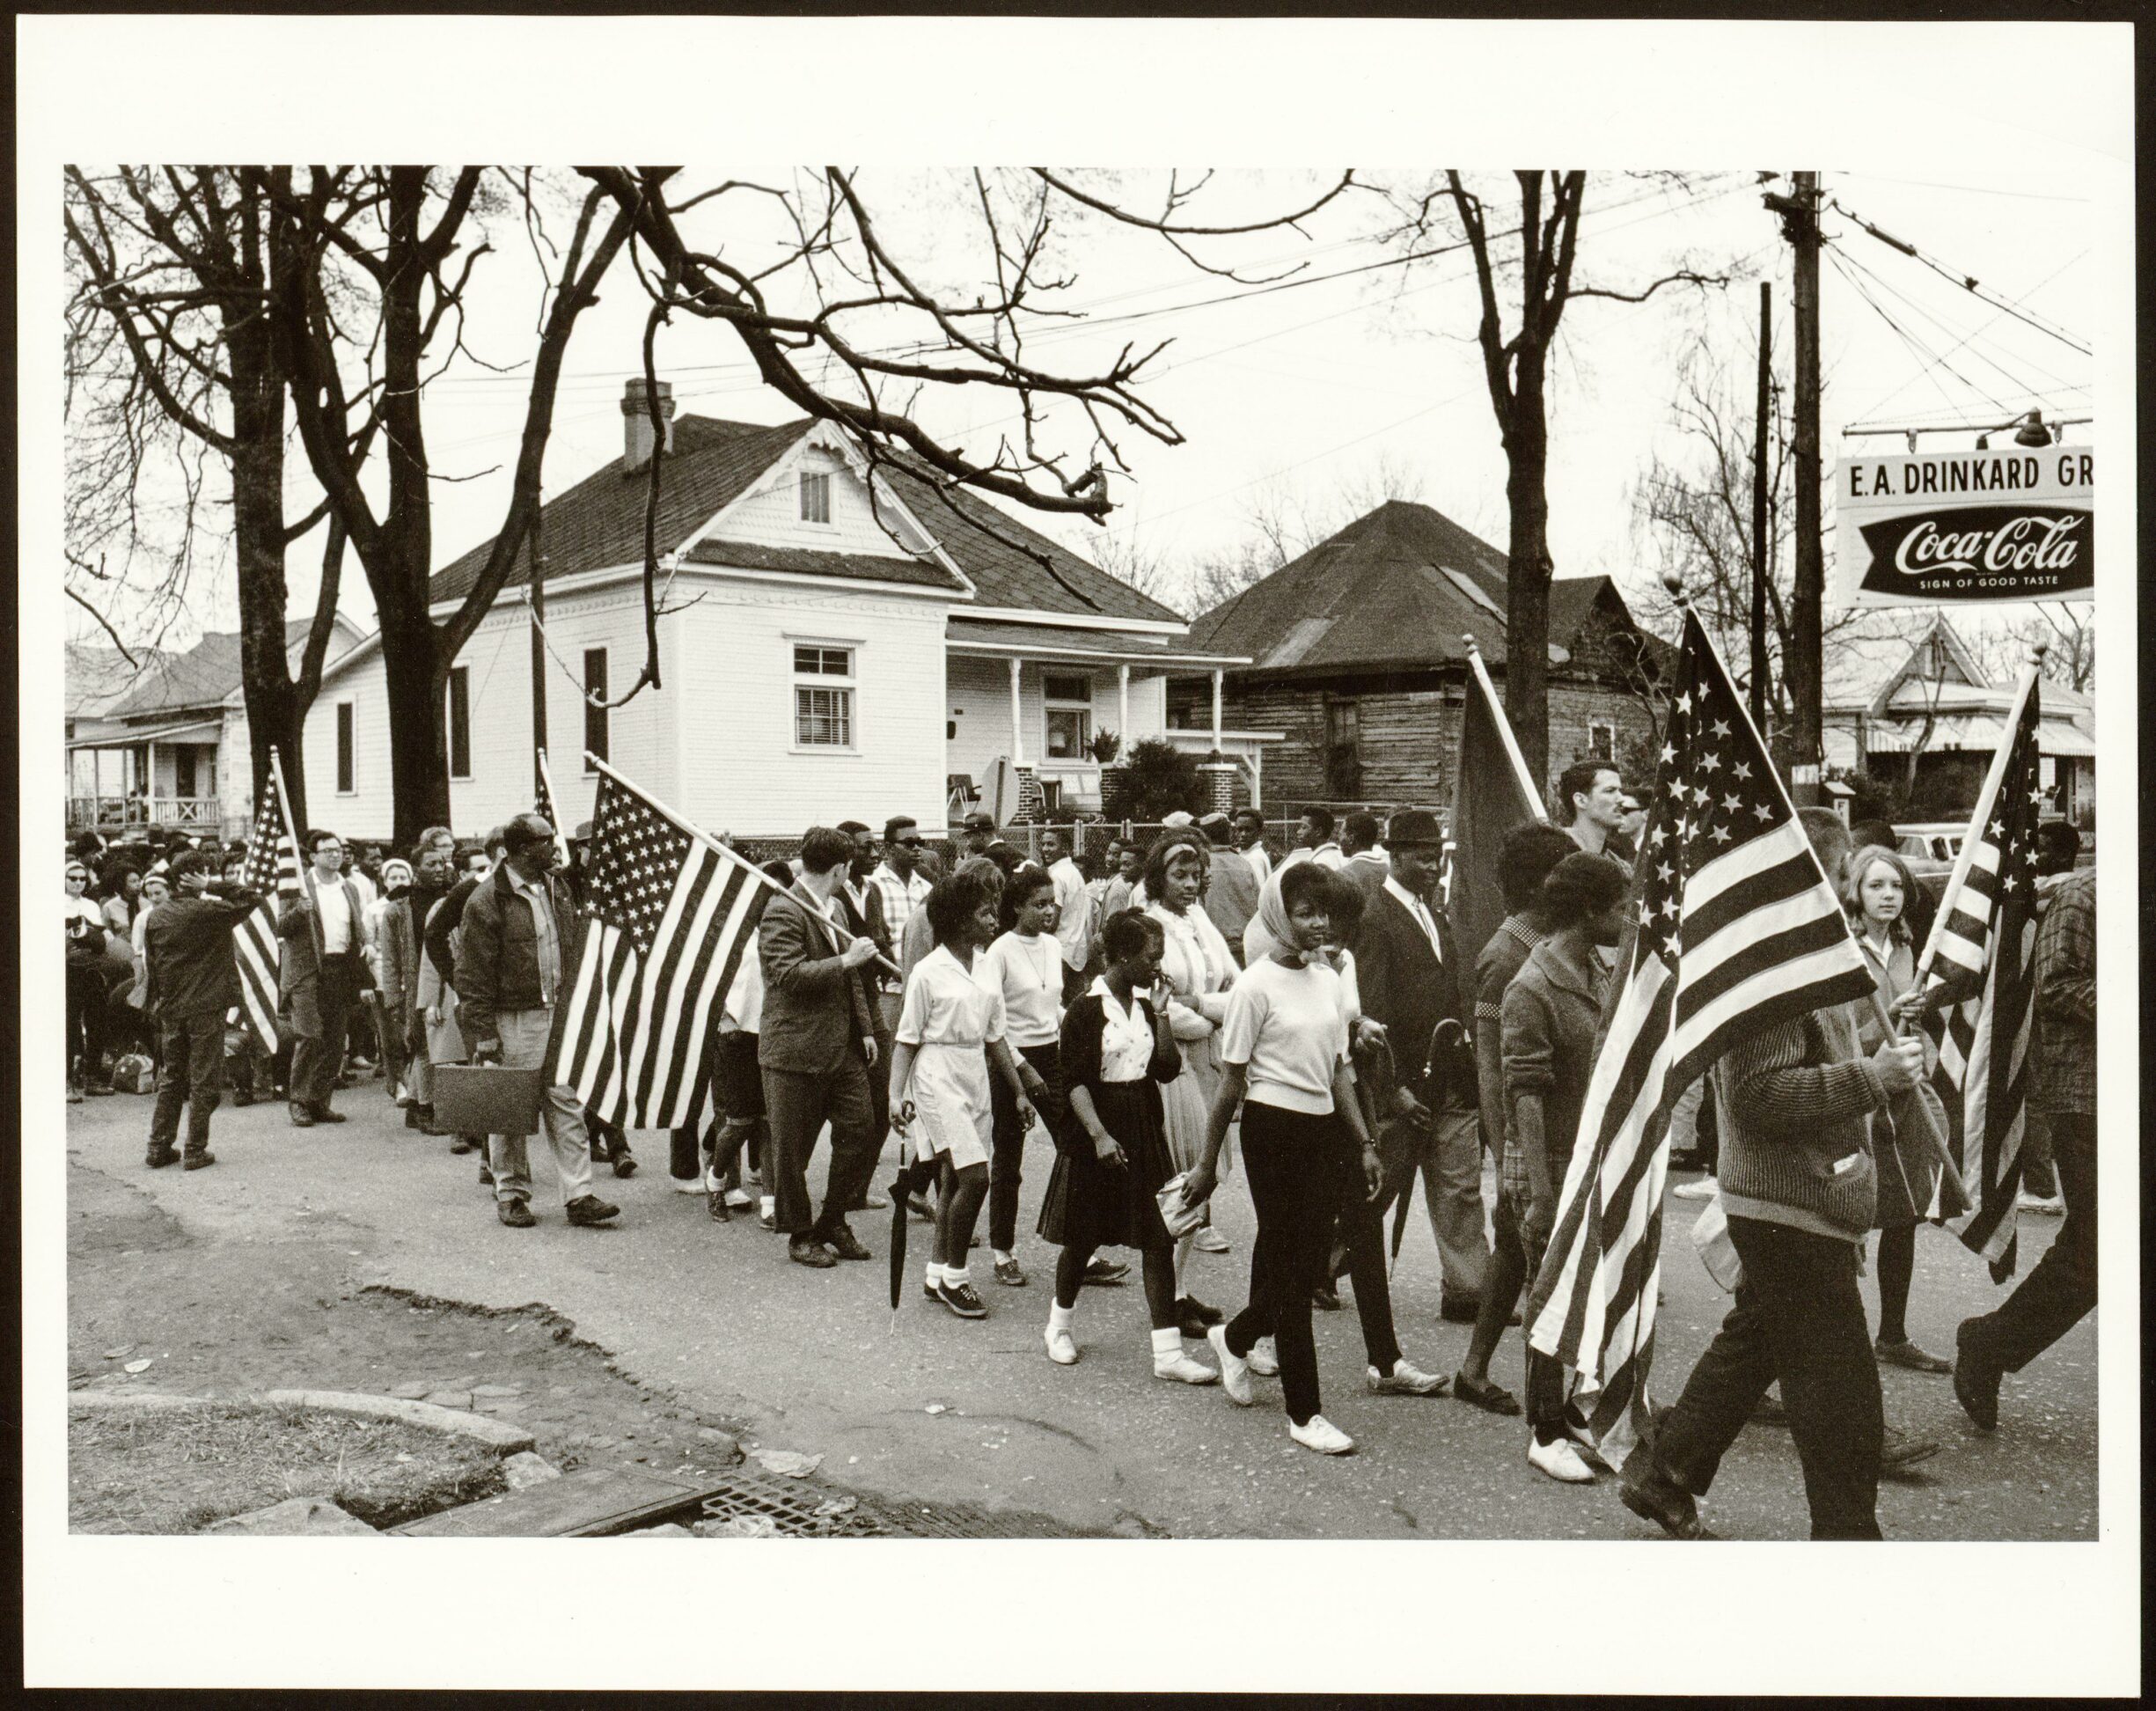 Selma to Montgomery, Alabama. Marching for civil rights, 1965. Participants, some carrying American flags, marching in the civil rights march from Selma to Montgomery, Alabama in 1965. Photo by Peter Pettus, Library of Congress, GPA Photo Archive. (CC BY-NC 2.0).